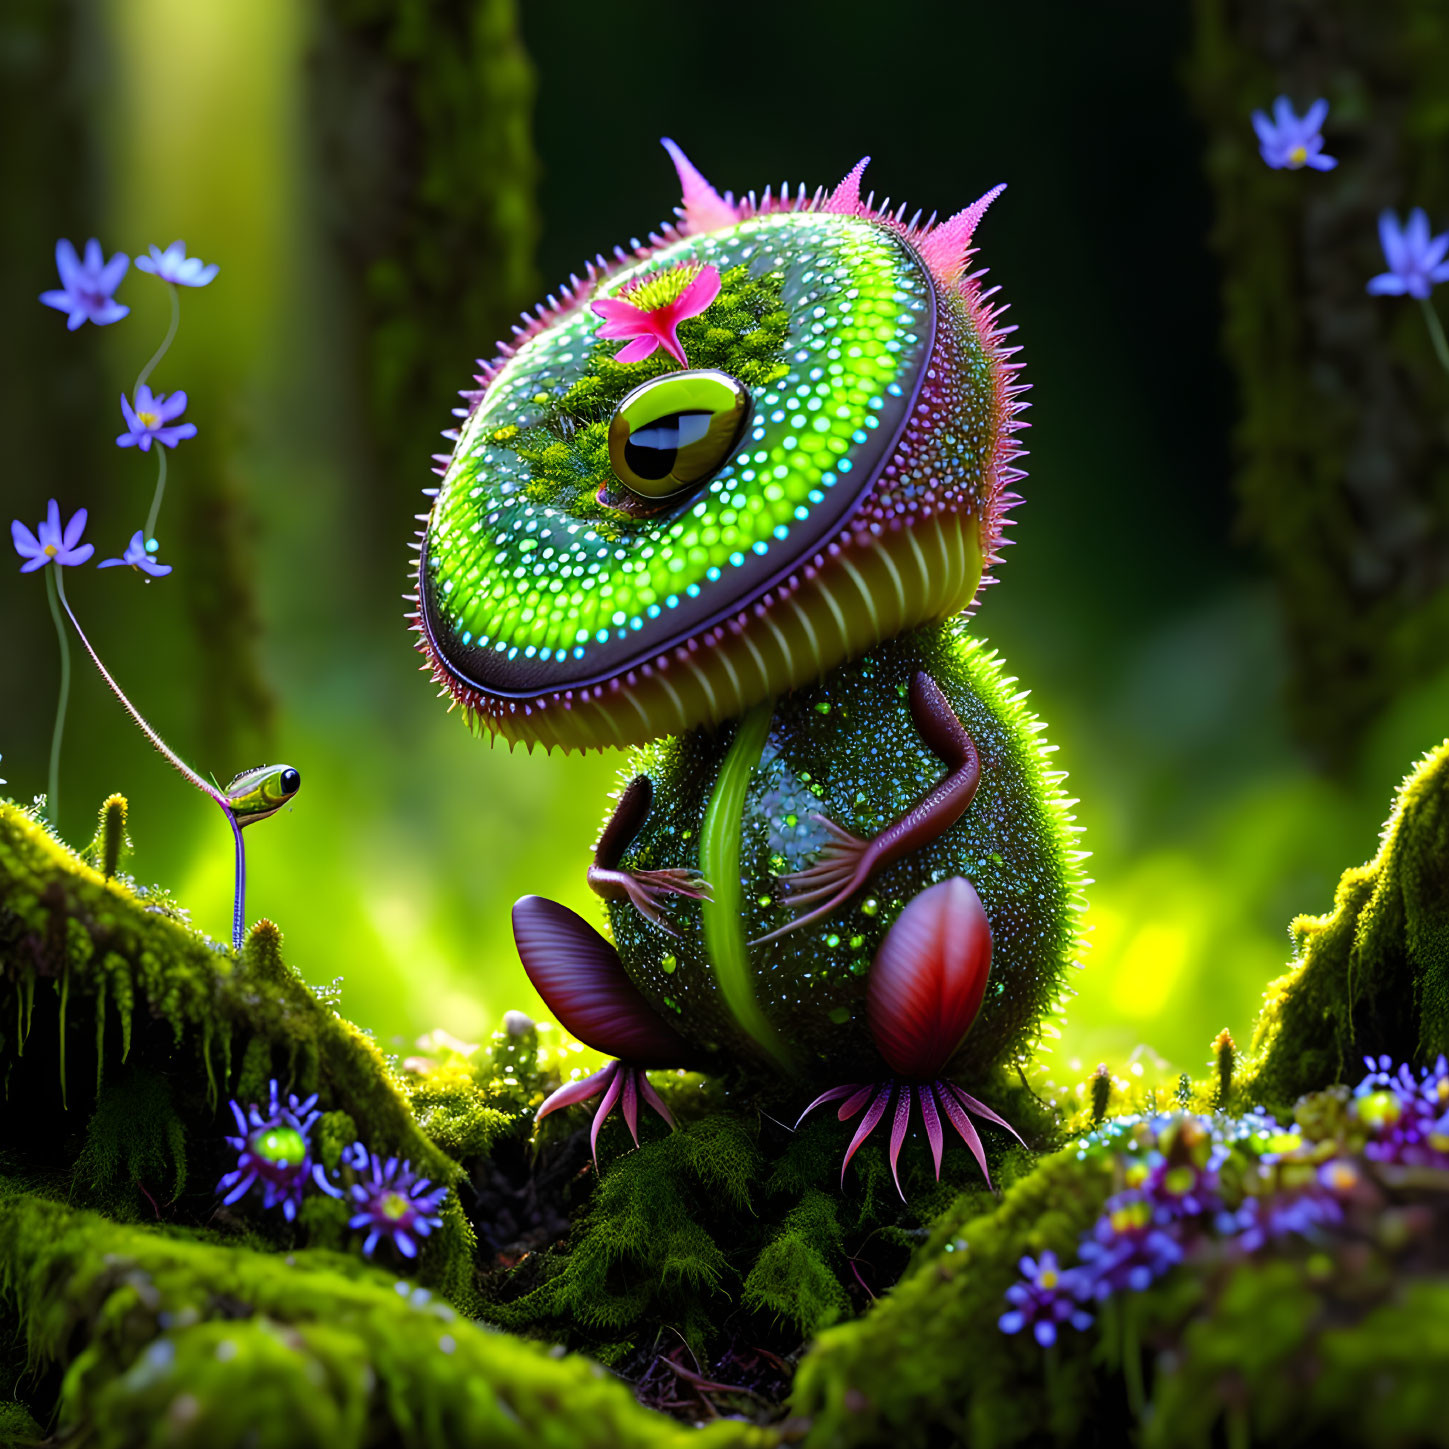 Colorful dinosaur-plant hybrid in mossy forest with purple flowers